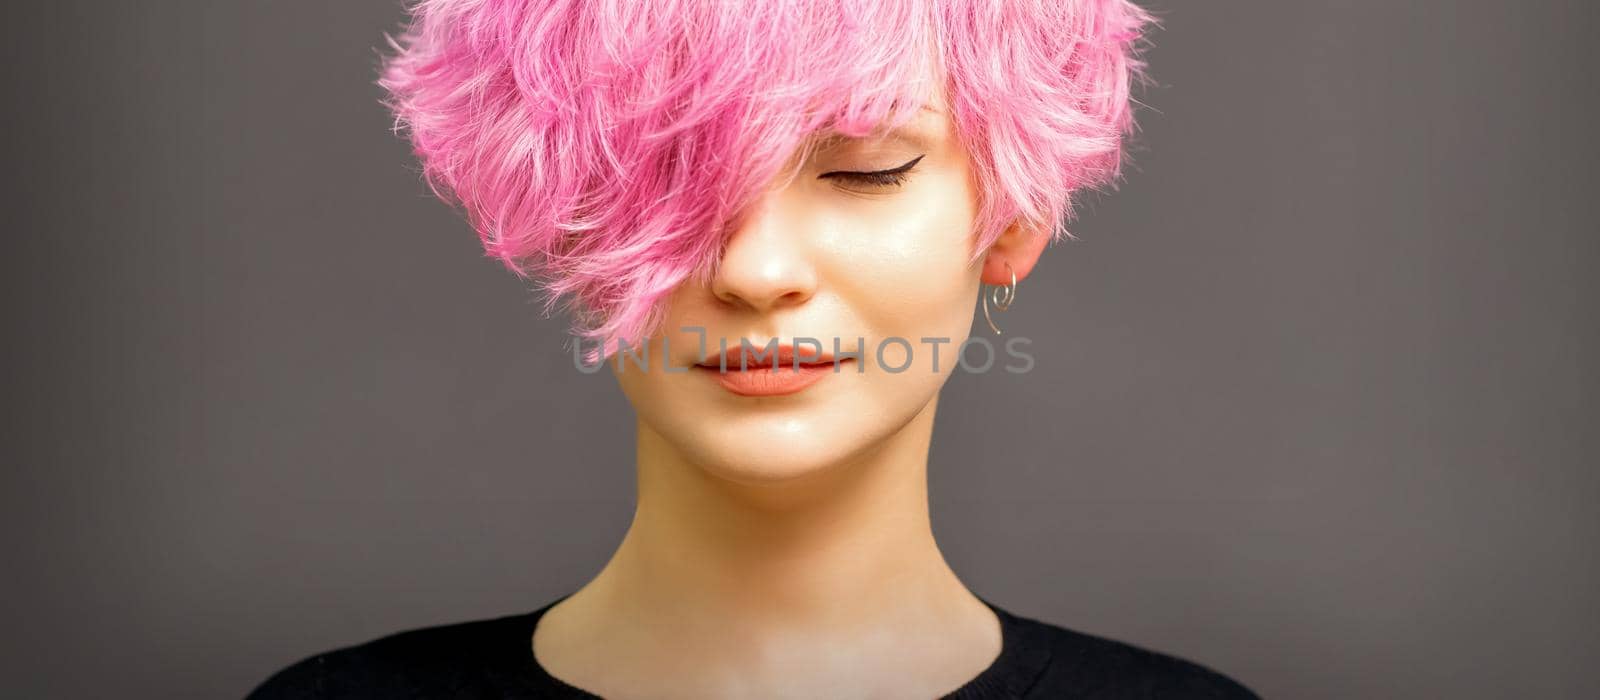 Beautiful young caucasian woman with short curly bob hairstyle dyed in pink color with closed eyes against dark gray background with copy space